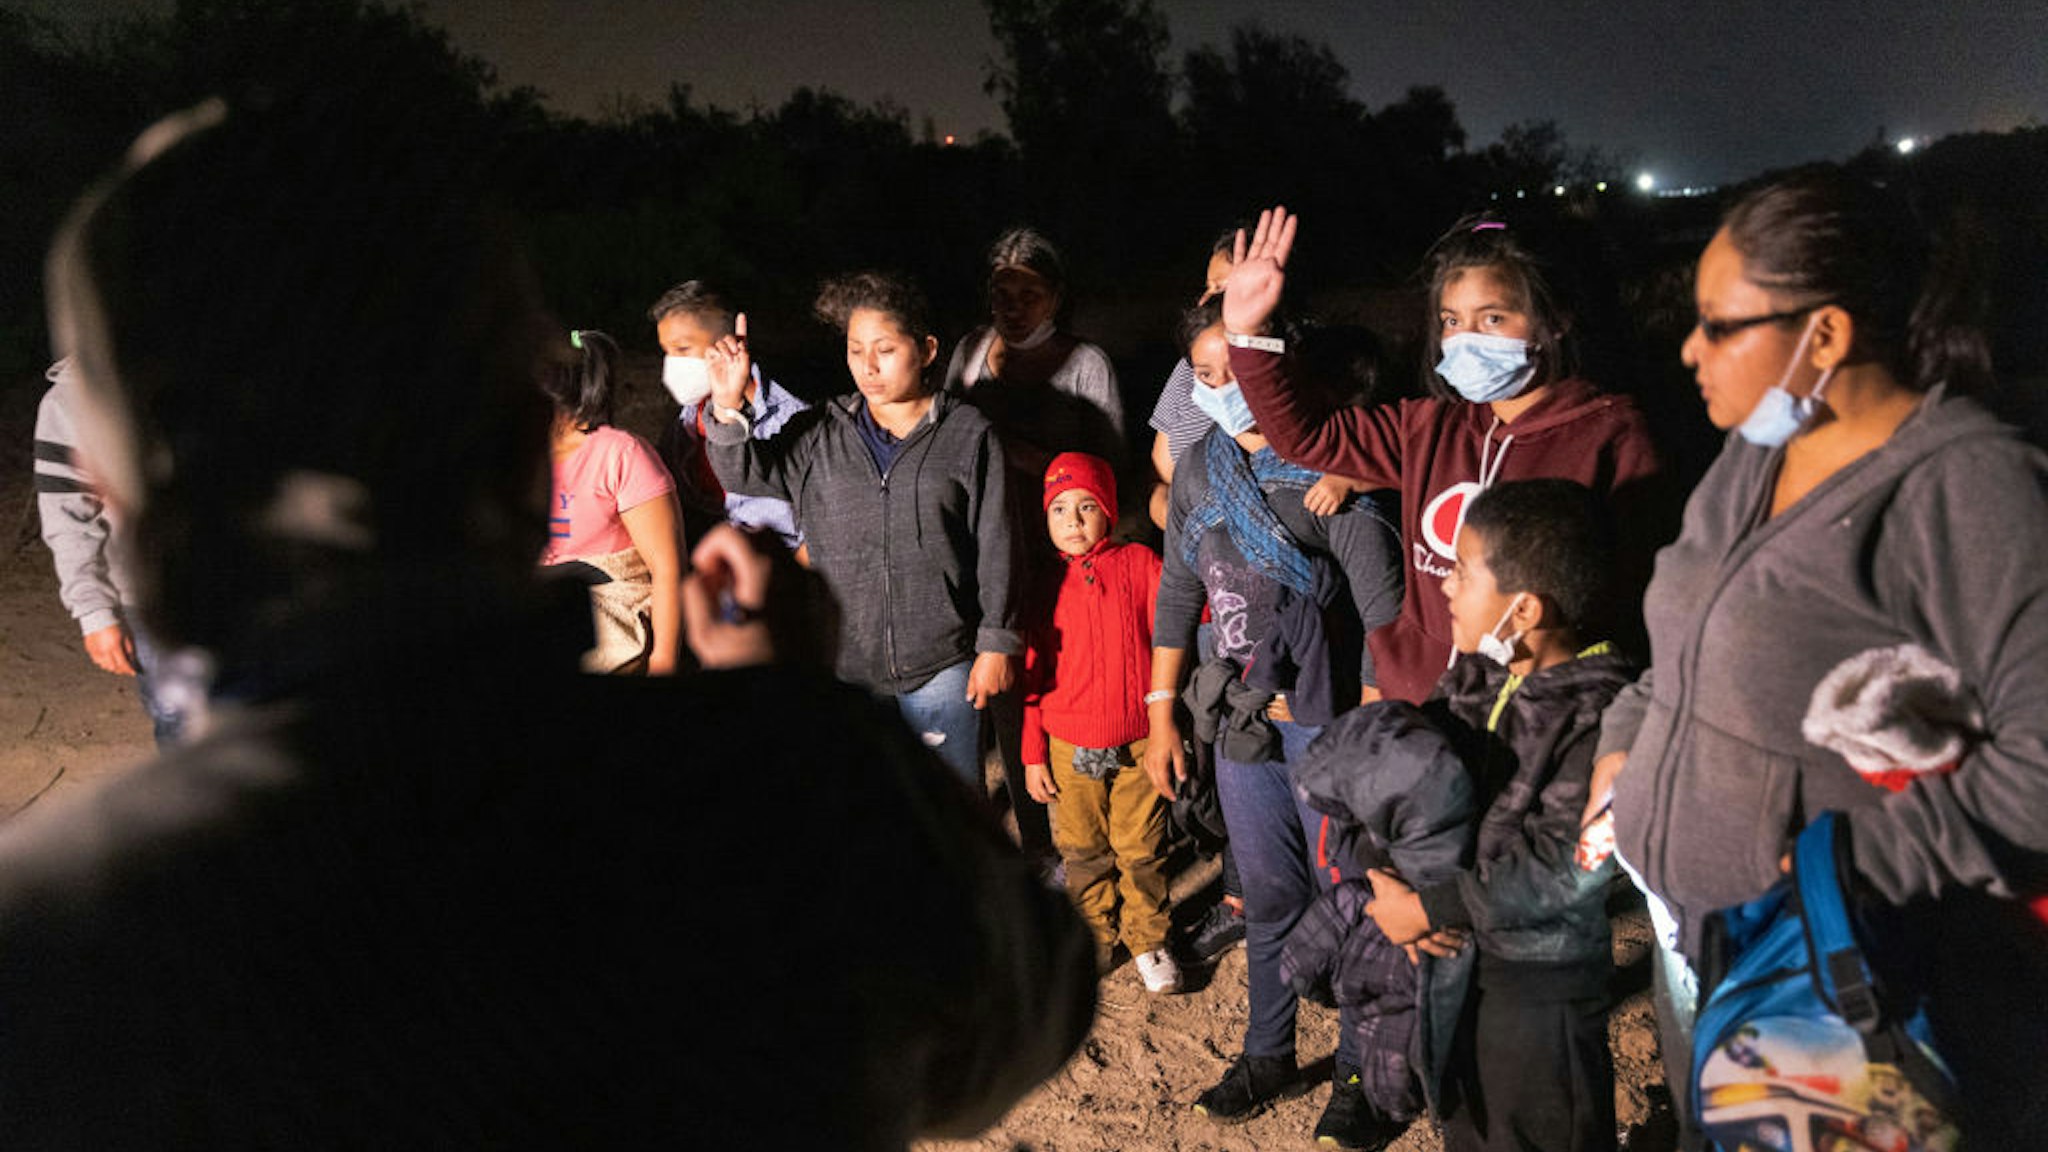 An unaccompanied minor raises her hand after a smuggler rowed her and other immigrants across the Rio Grande at the U.S.-Mexico border on April 9, 2021 in Roma, Texas.